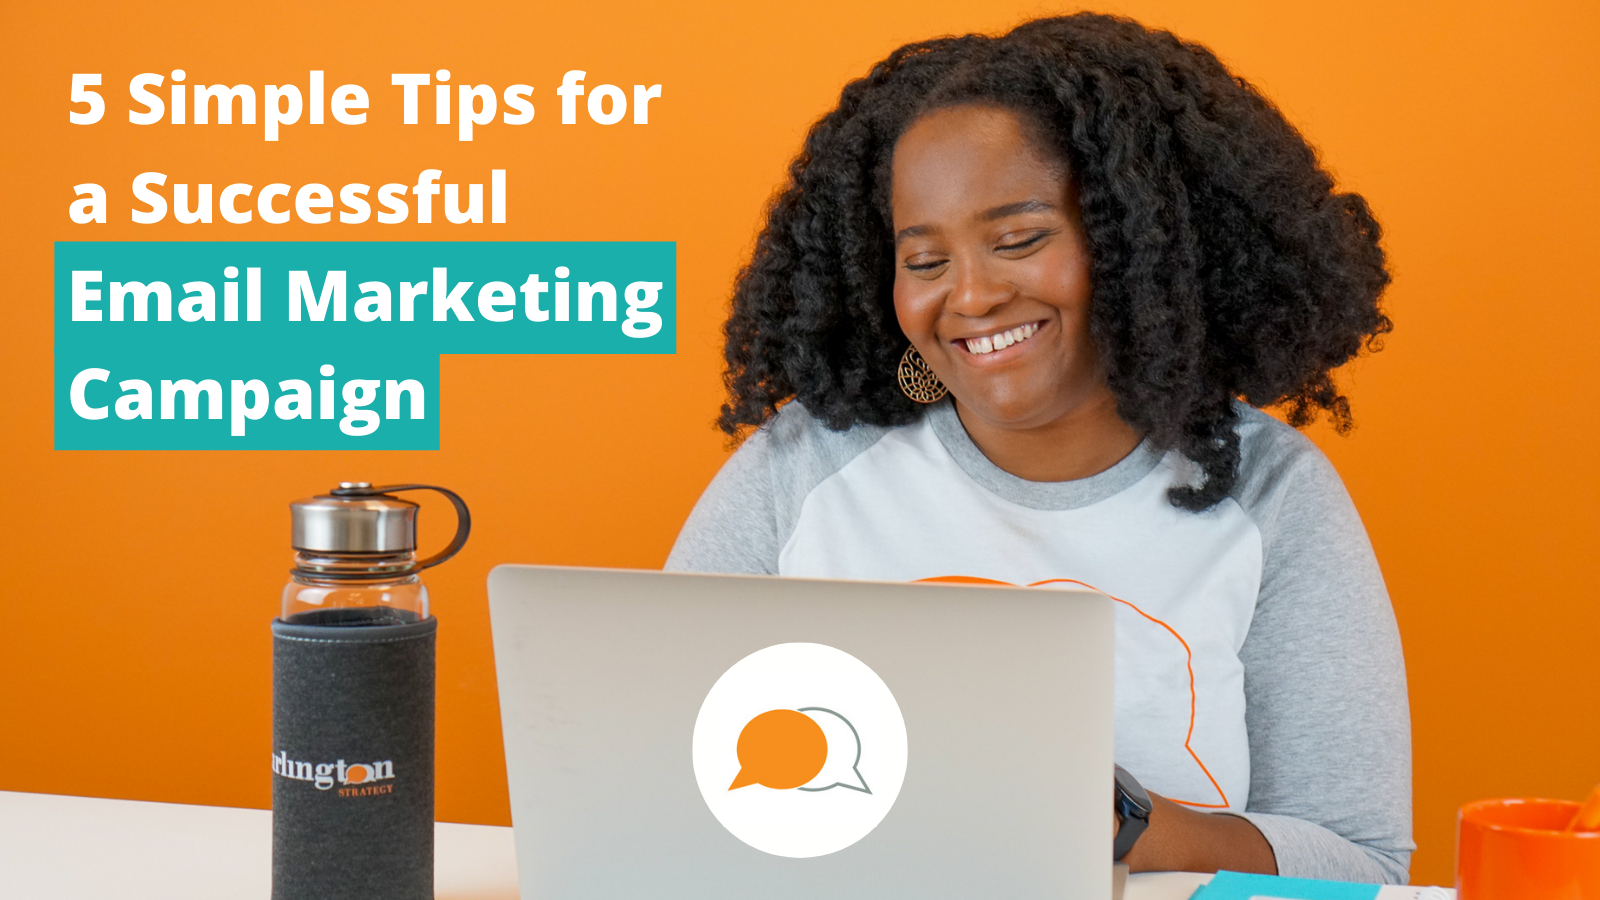 5 Simple Tips for a Successful Email Marketing Campaign